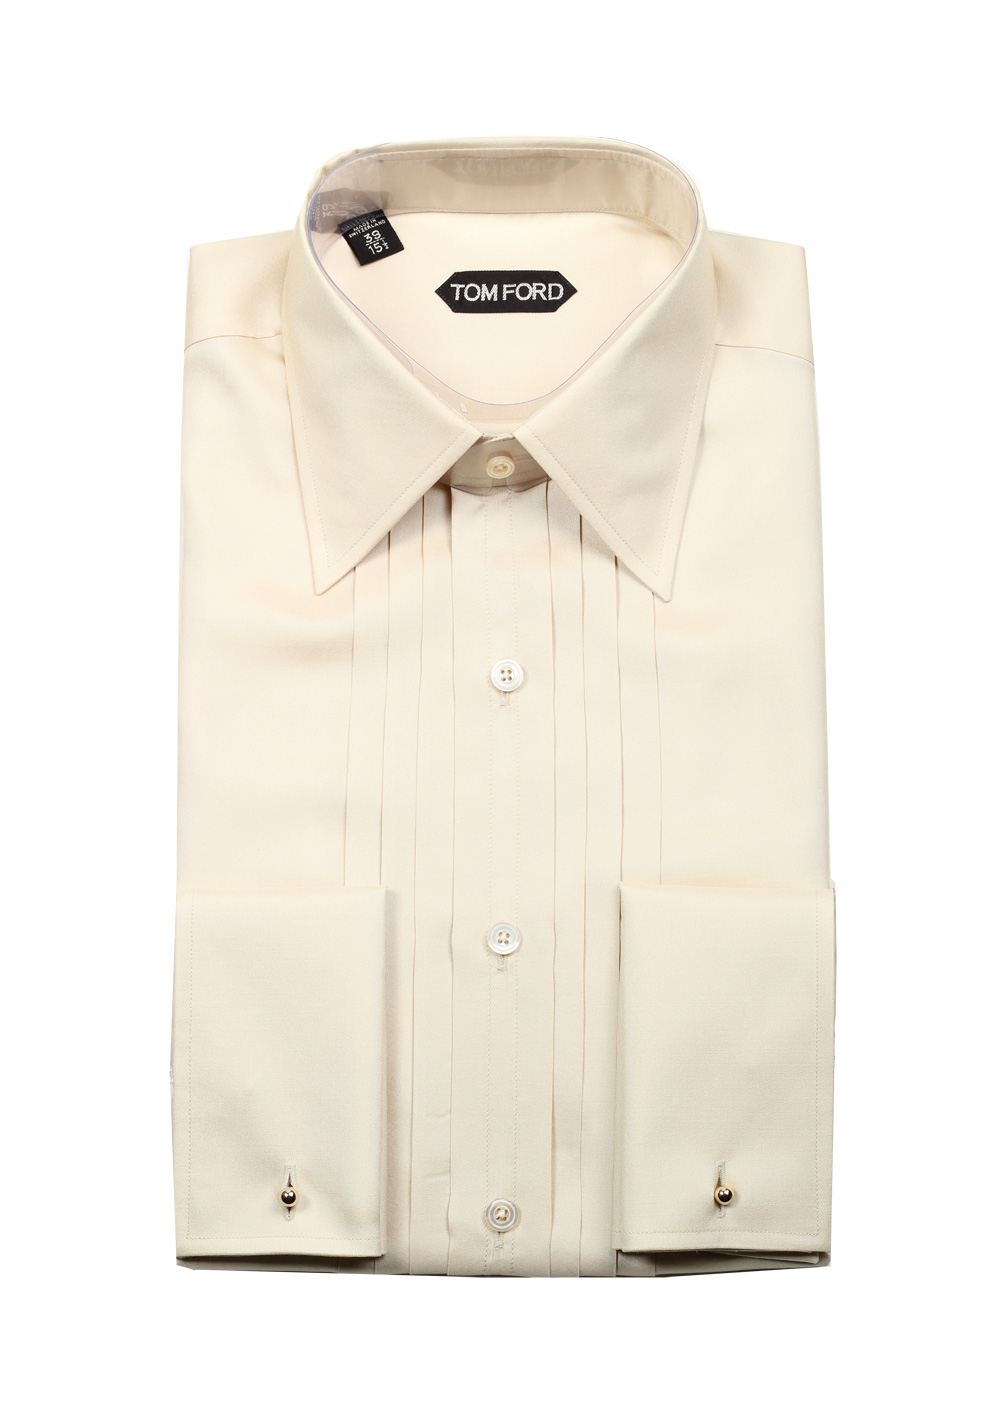 TOM FORD Solid Off White Charmeuse Evening Tuxedo Shirt Size 39 / 15,5 U.S. | Costume Limité